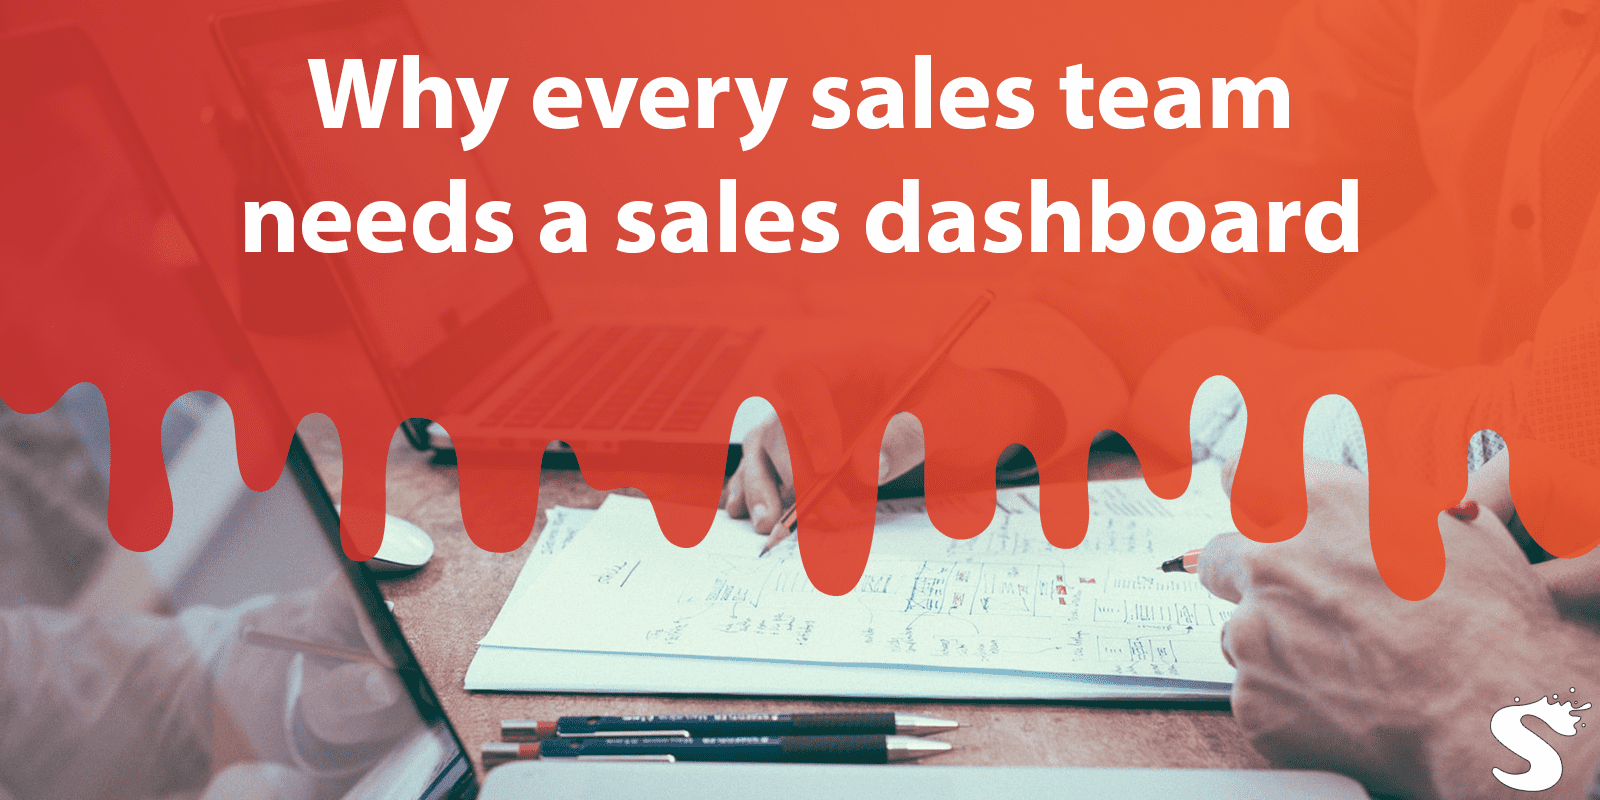 Why every sales team needs a sales dashboard